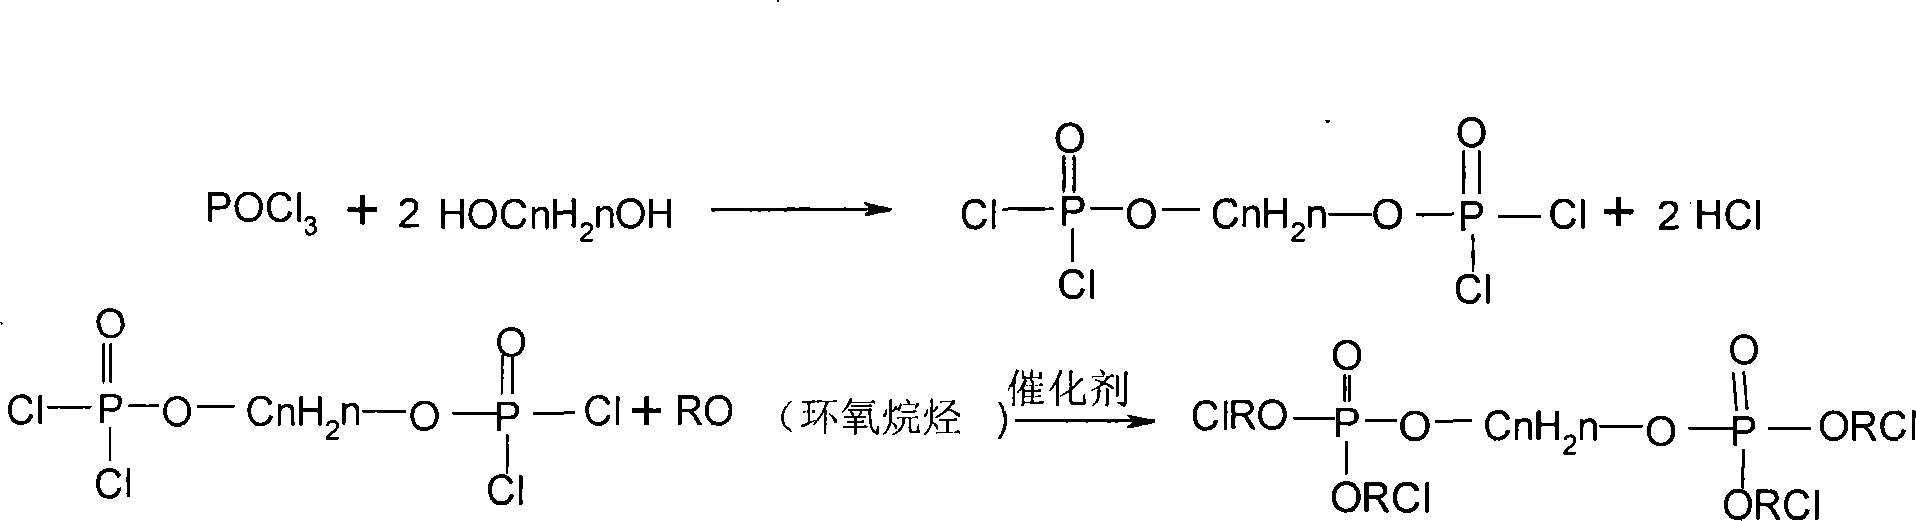 Halogen-containing diphosphate or preparation method of halogen-containing diphosphorous acid ester